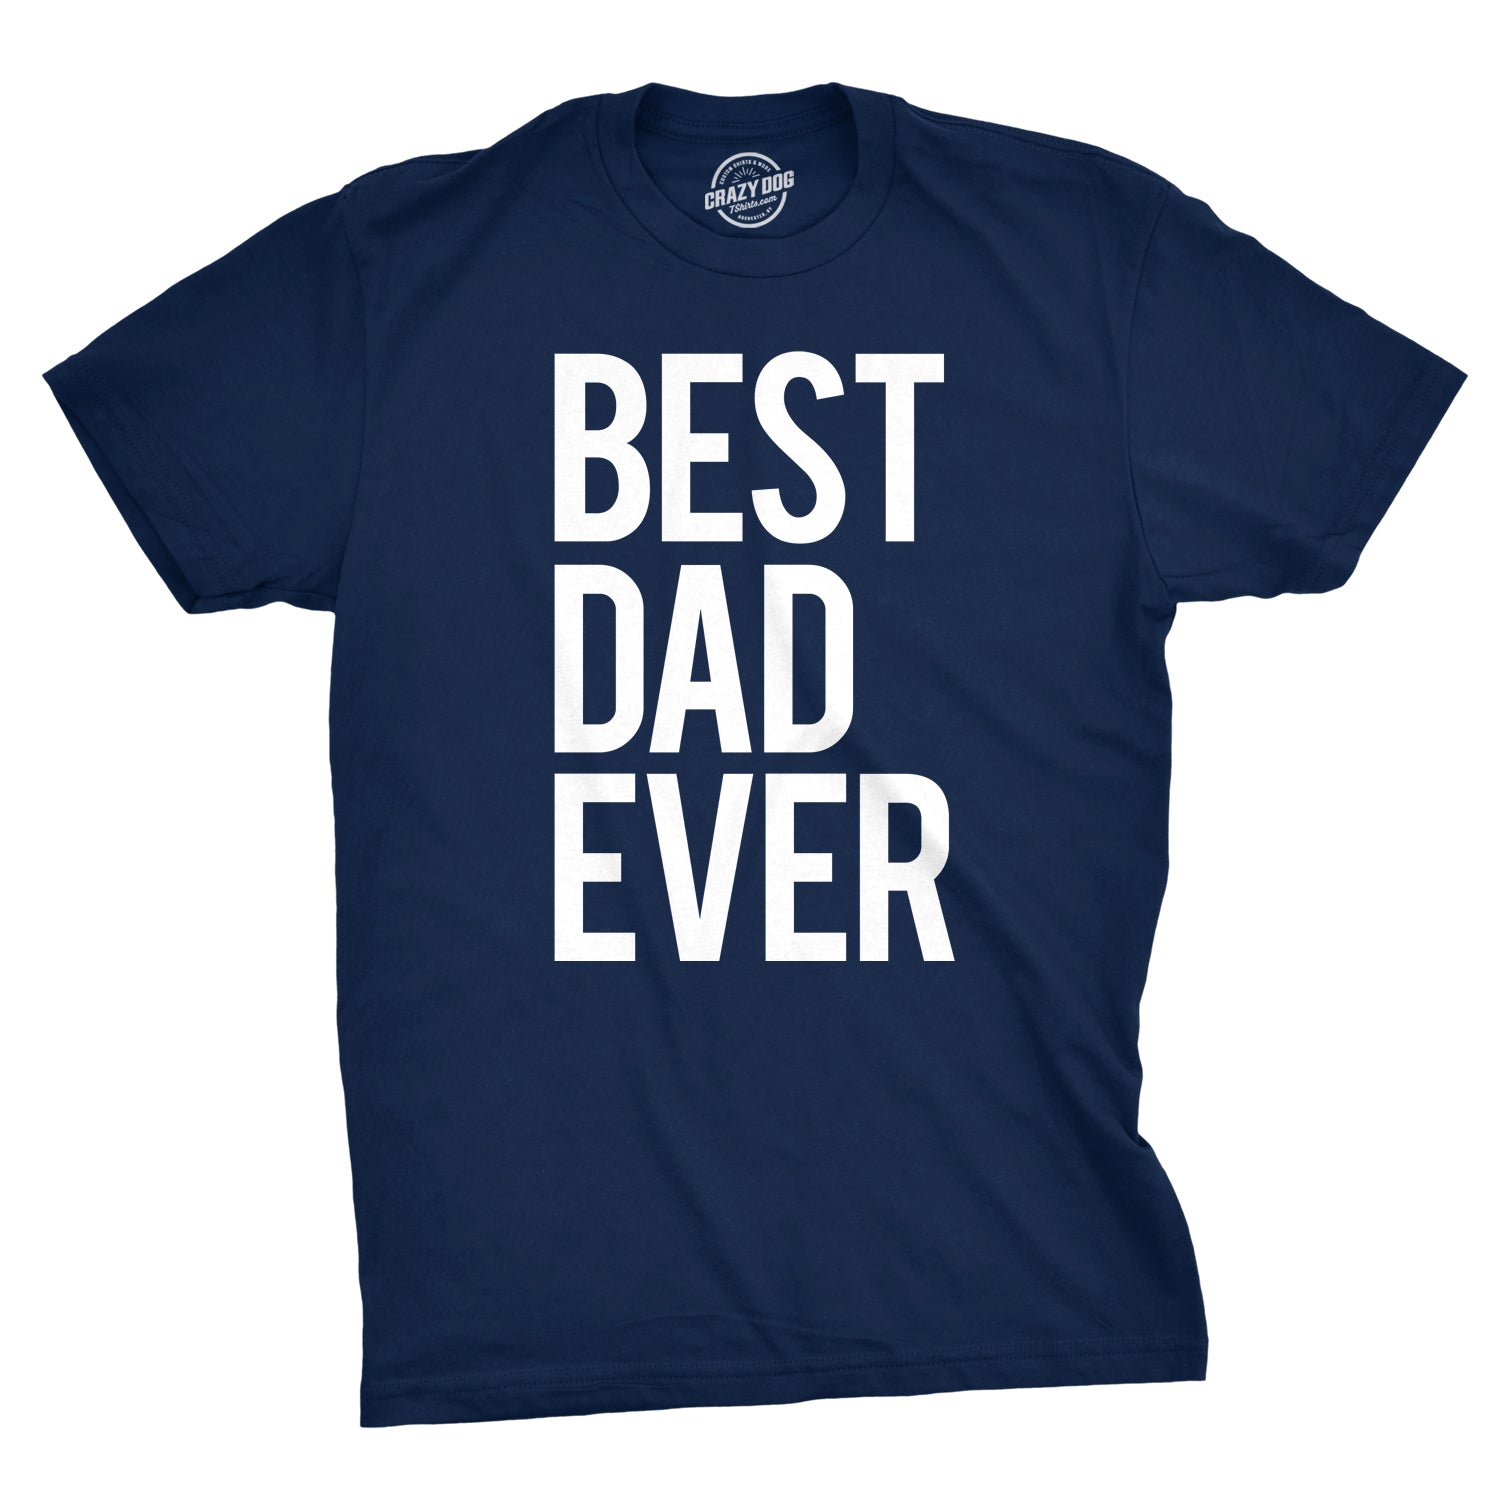 Funny Fathers Day Shirts, Cool Shirt for Dads